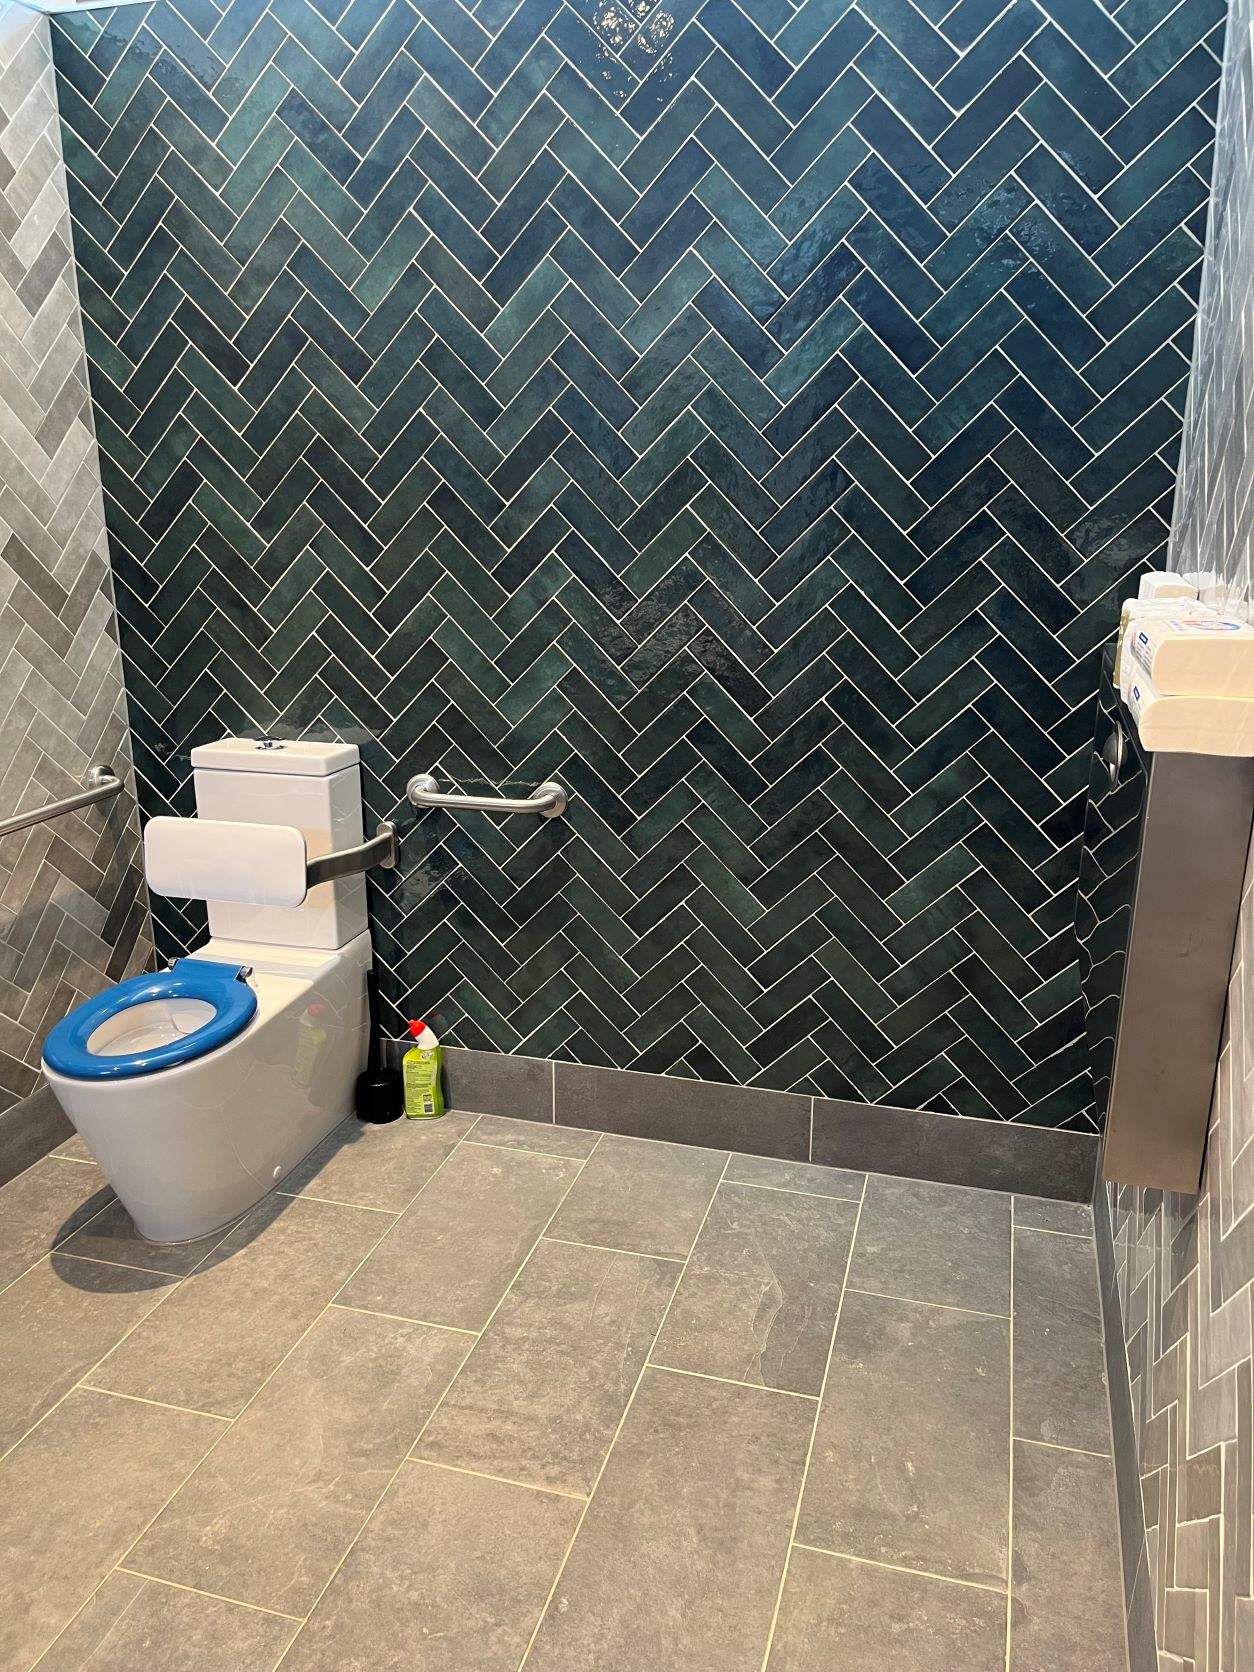 Accessible toilet and baby change